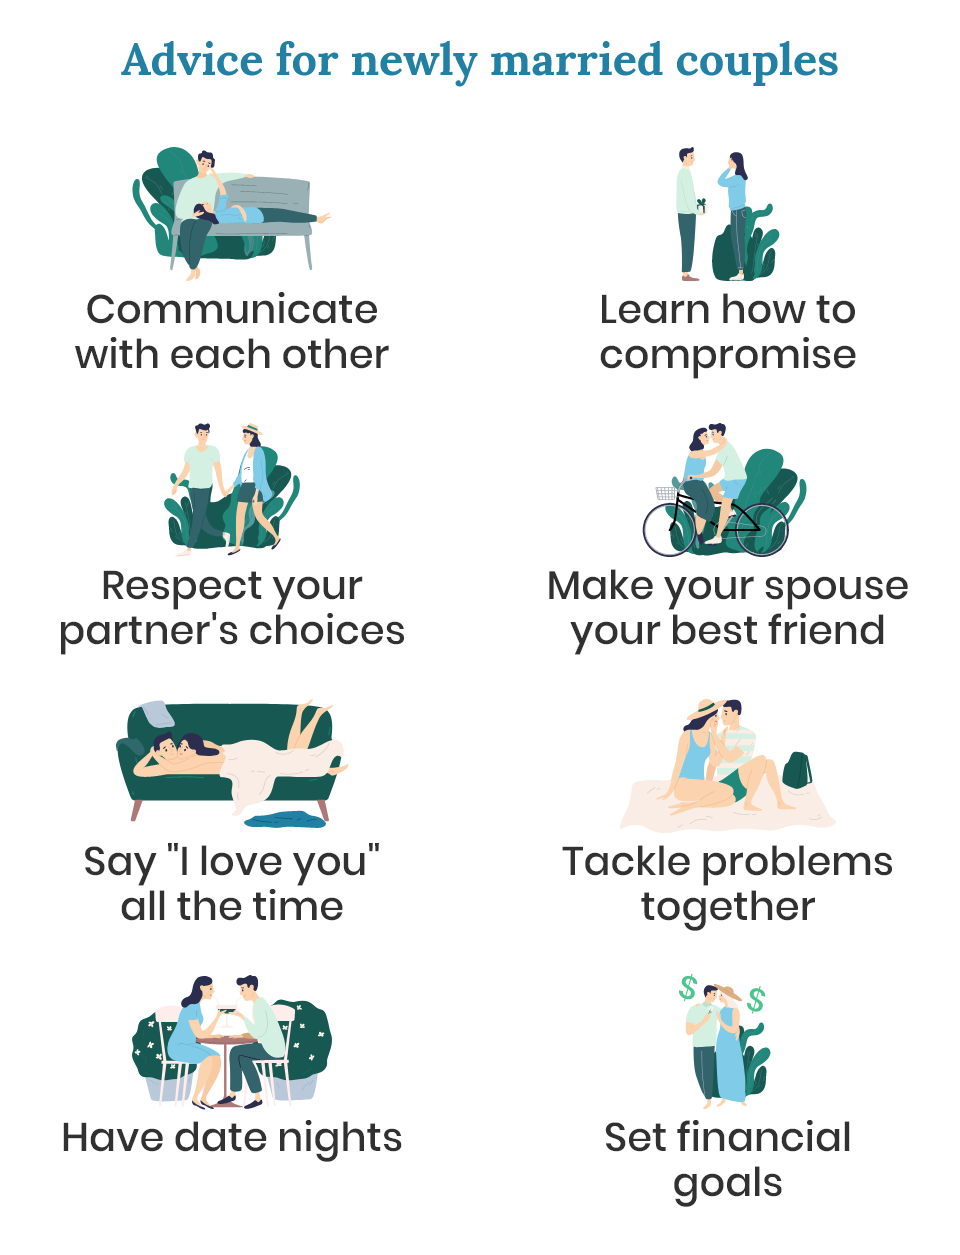 Marriage advice for newlyweds infographic